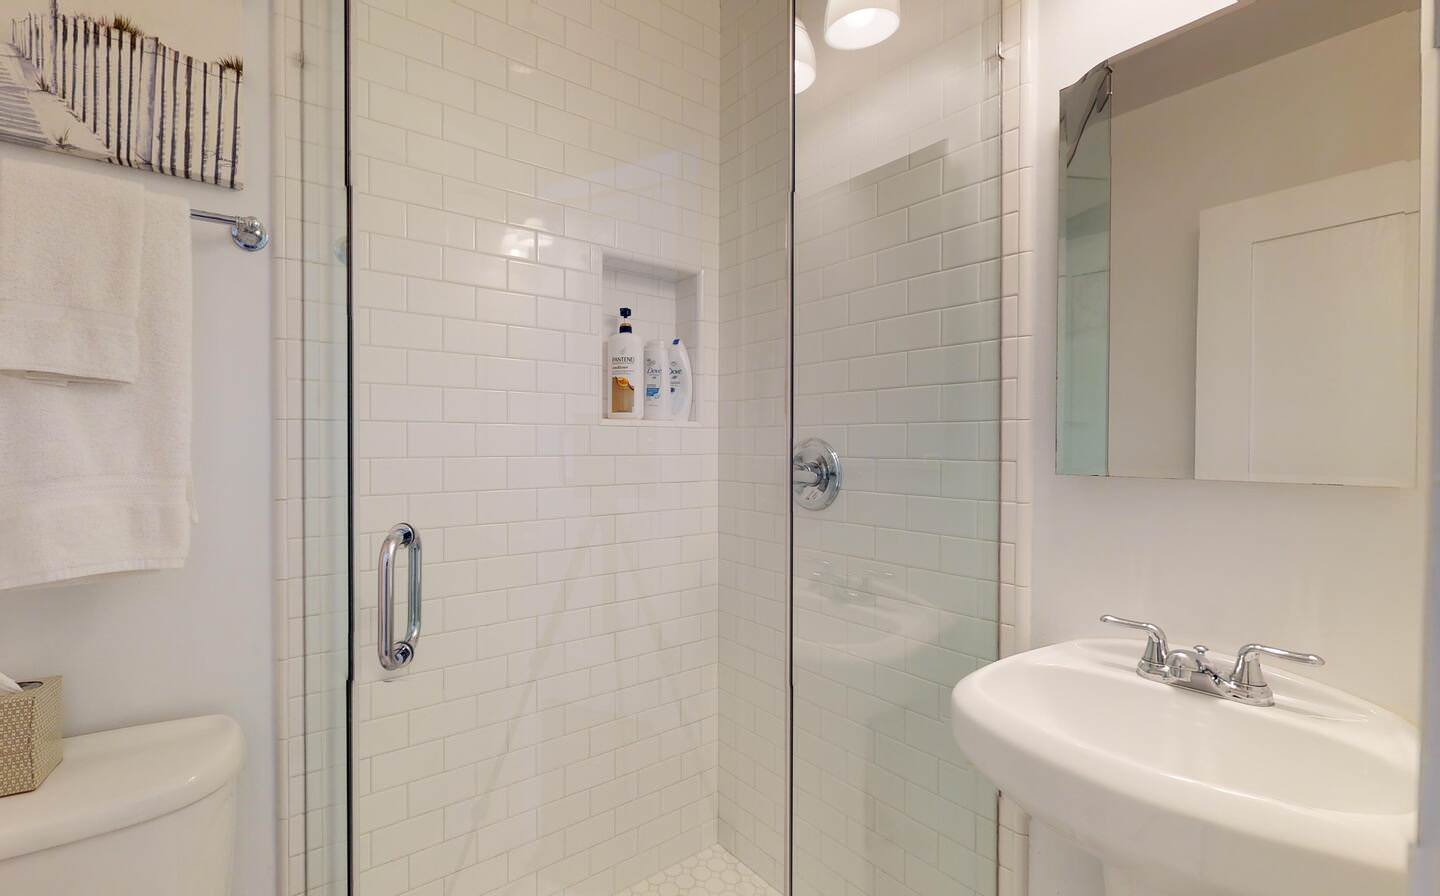 Shared bathroom with stand up shower